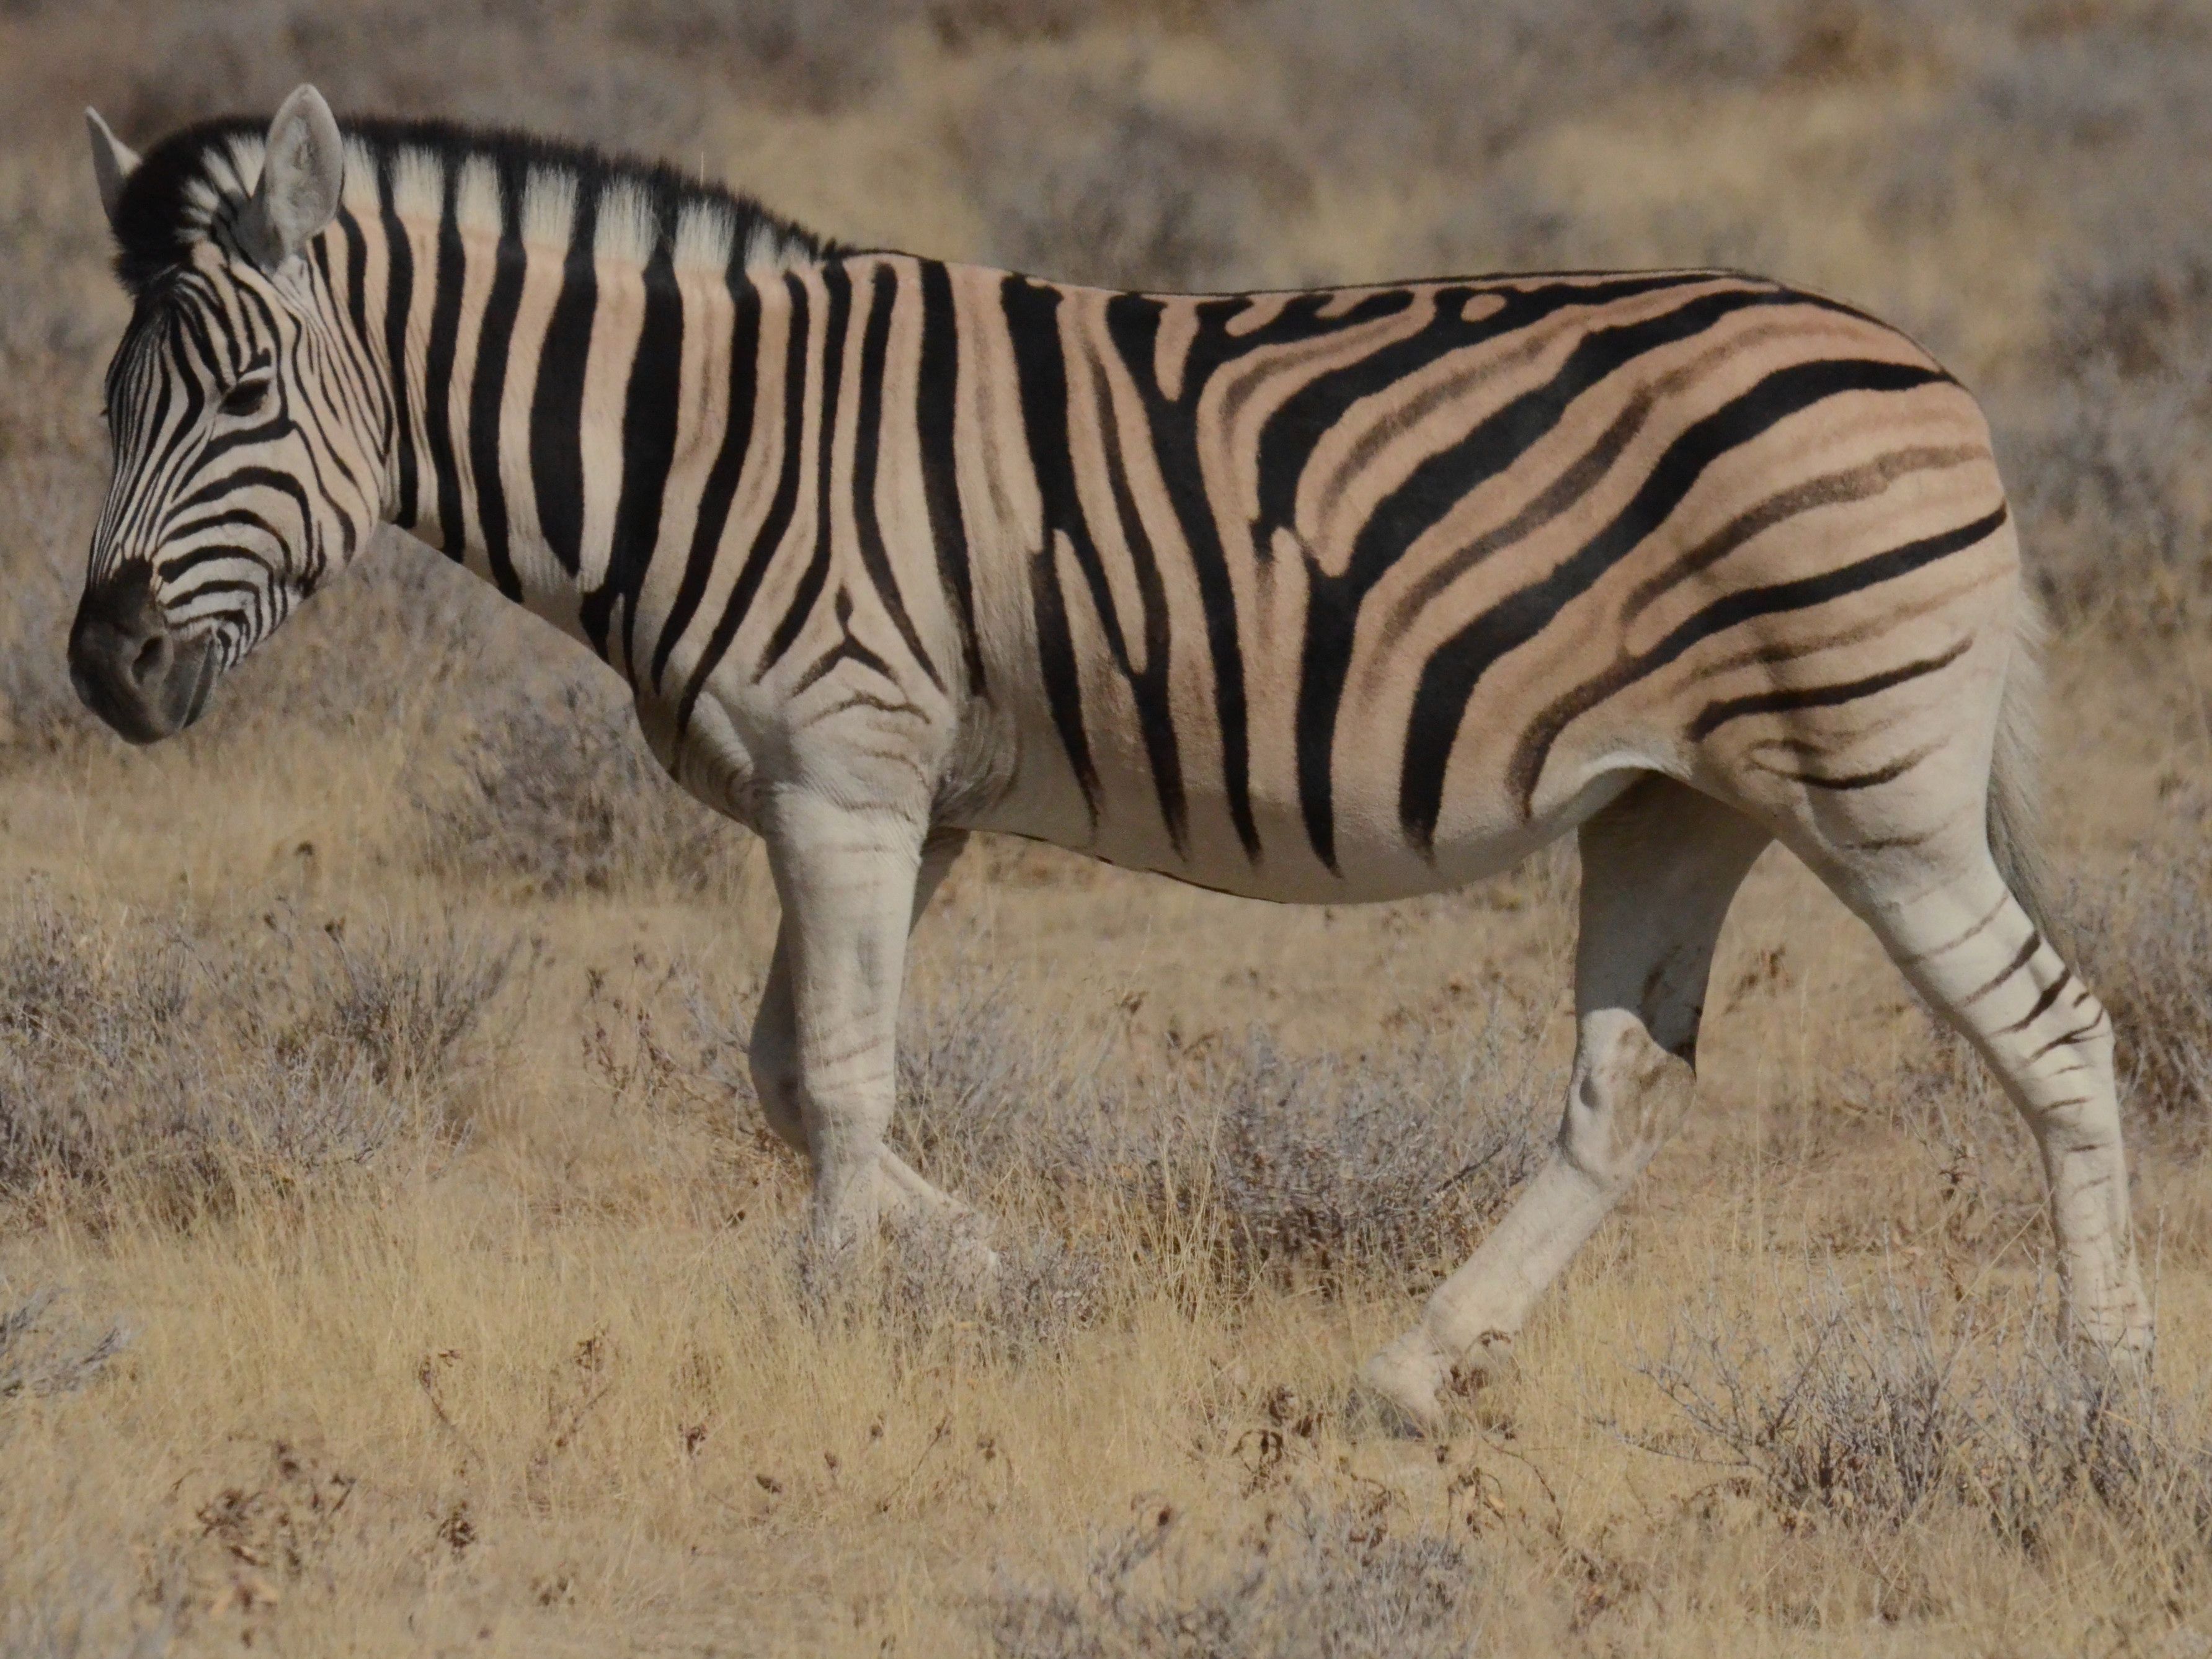 Click picture to see more Common (Burchell's) Zebras.